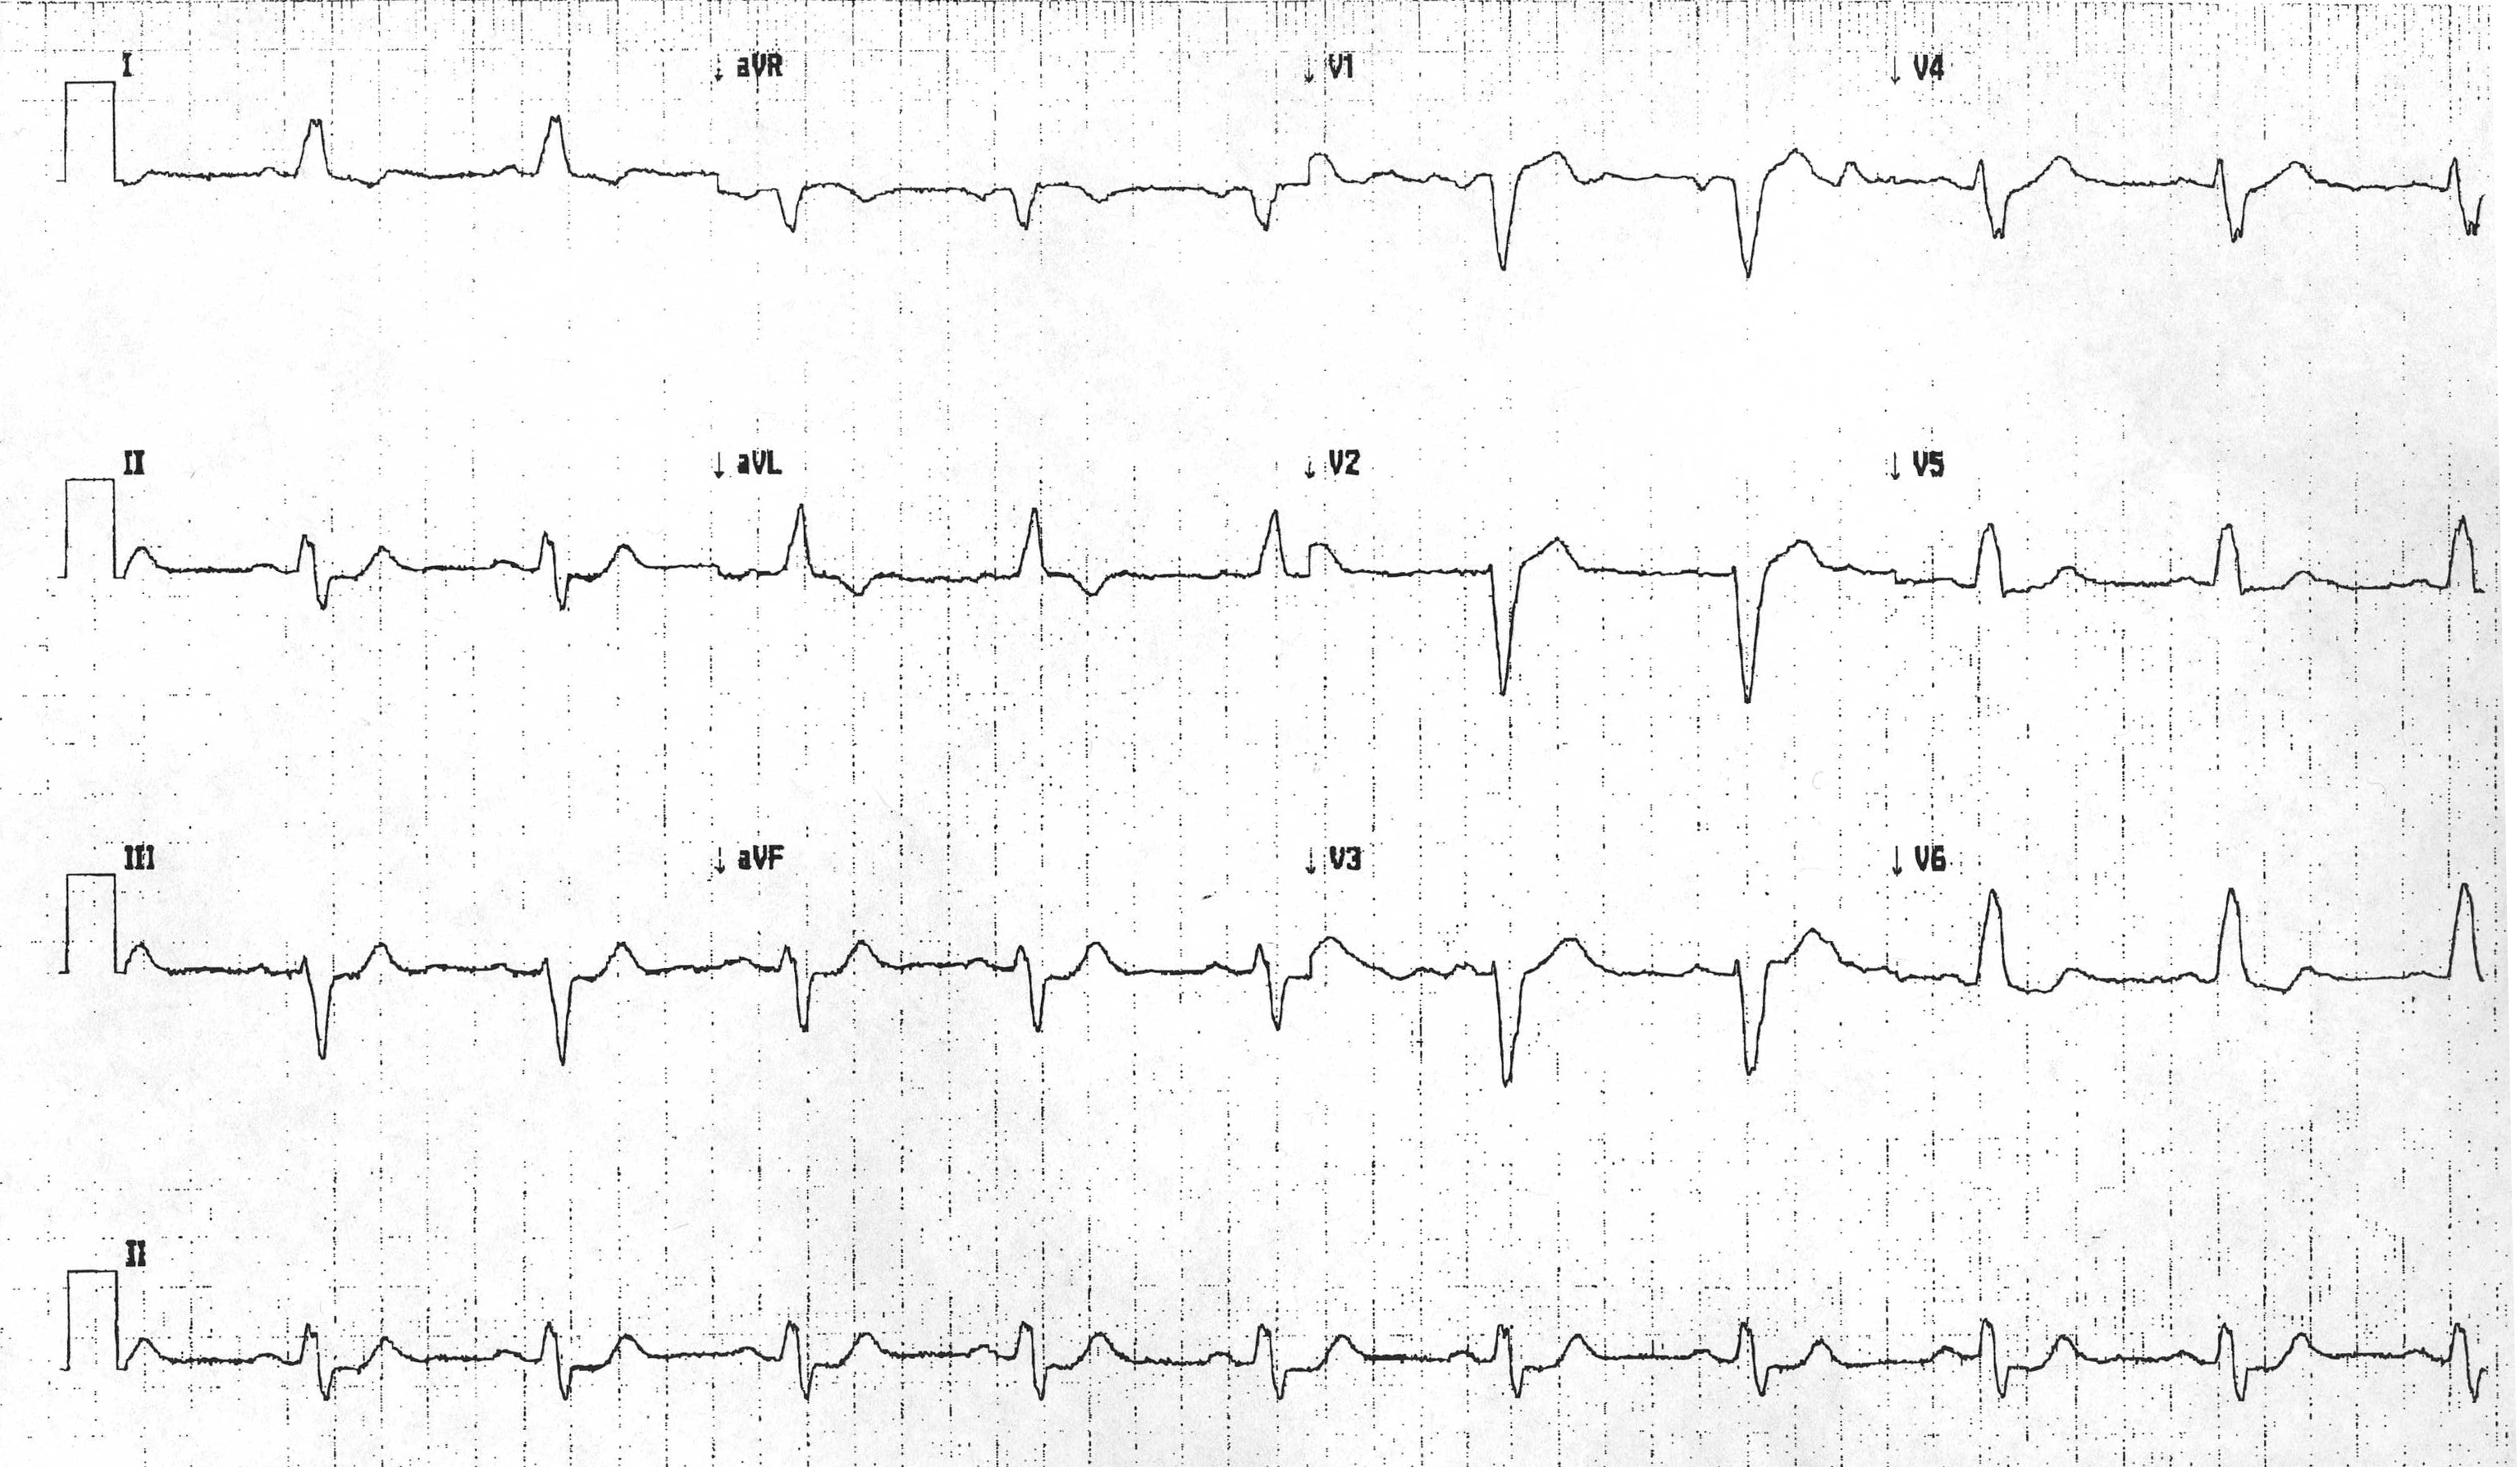 File:LBBB with pseudonormalization of T waves.jpg